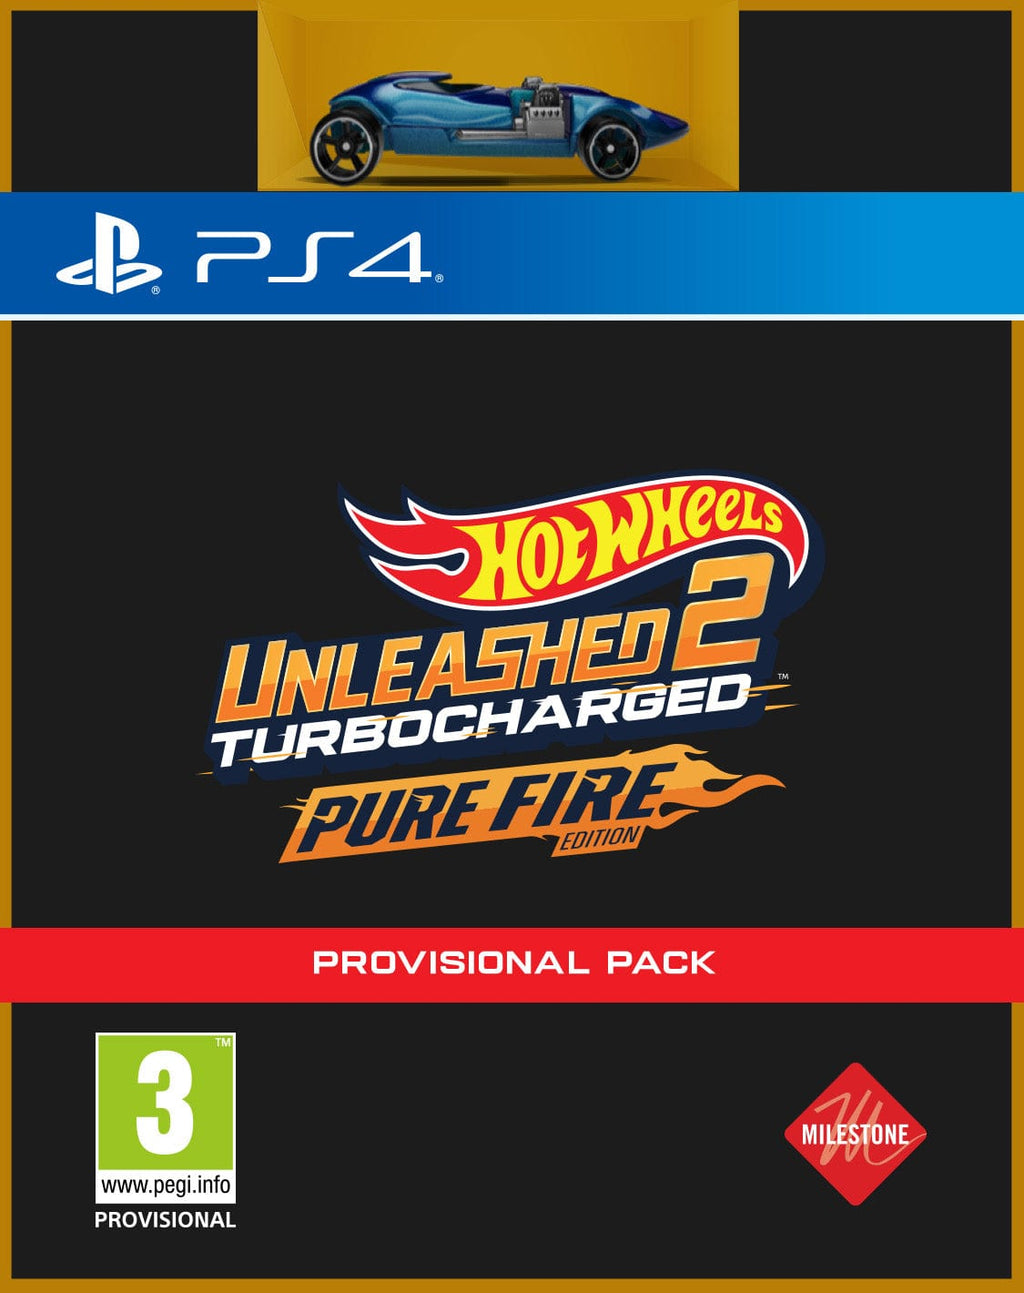 HOT WHEELS UNLEASHED™ 2 - Unstoppables Pack for Nintendo Switch - Nintendo  Official Site